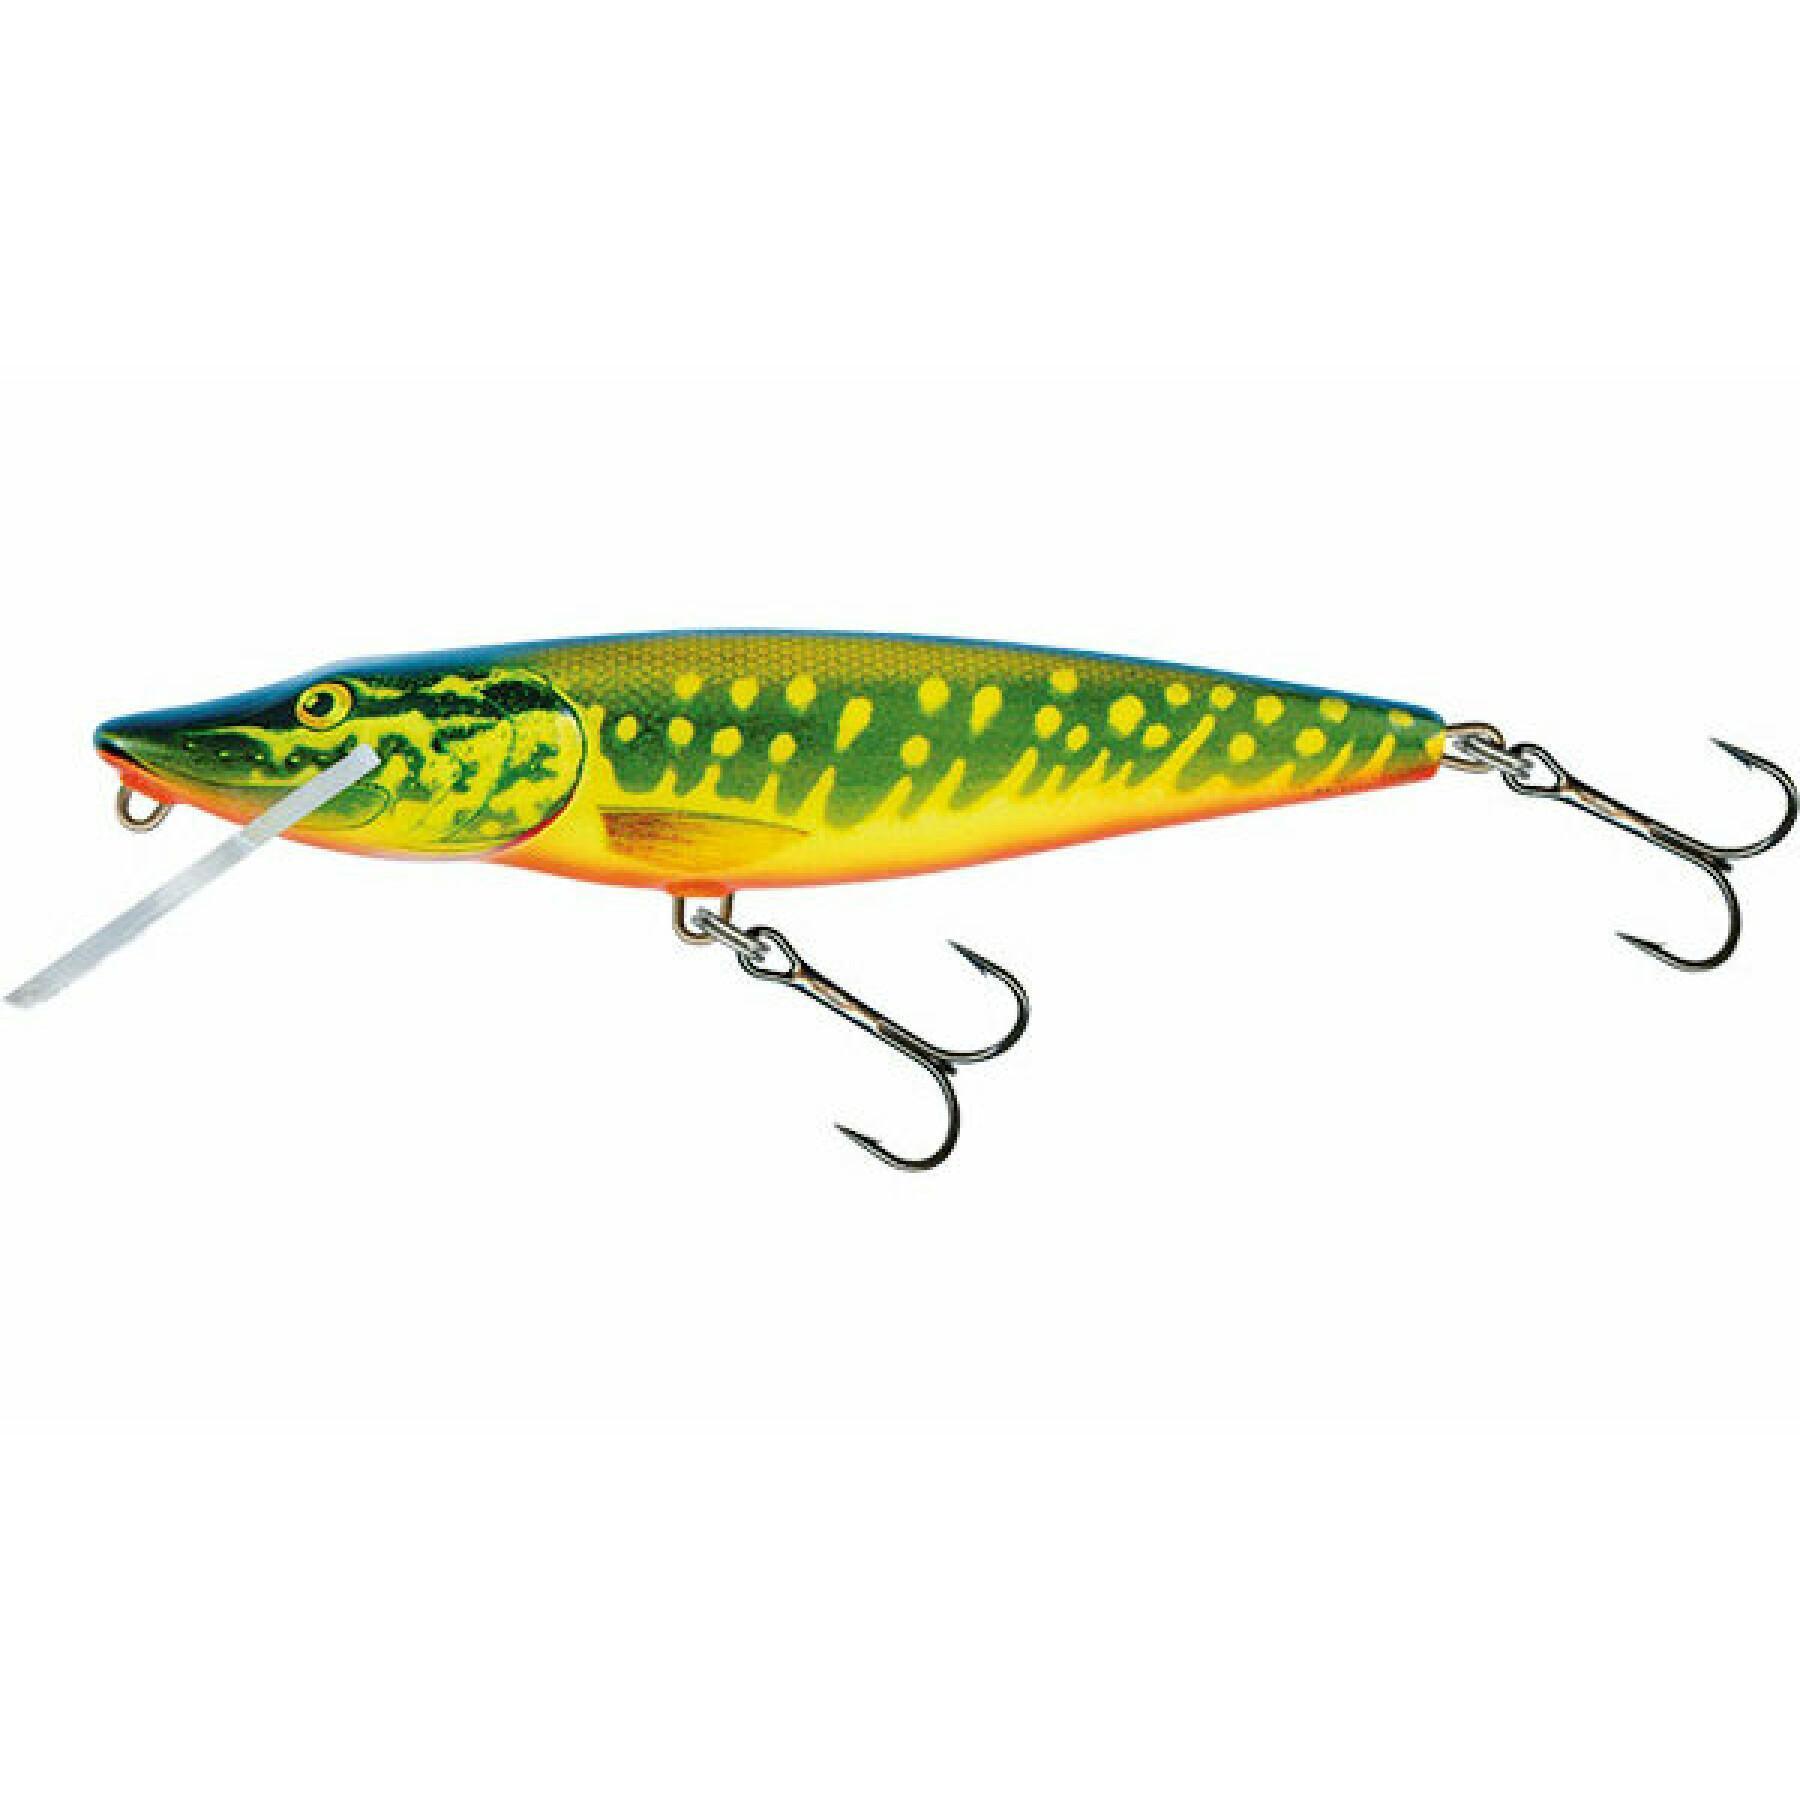 Floating lure Salmo pike 52g